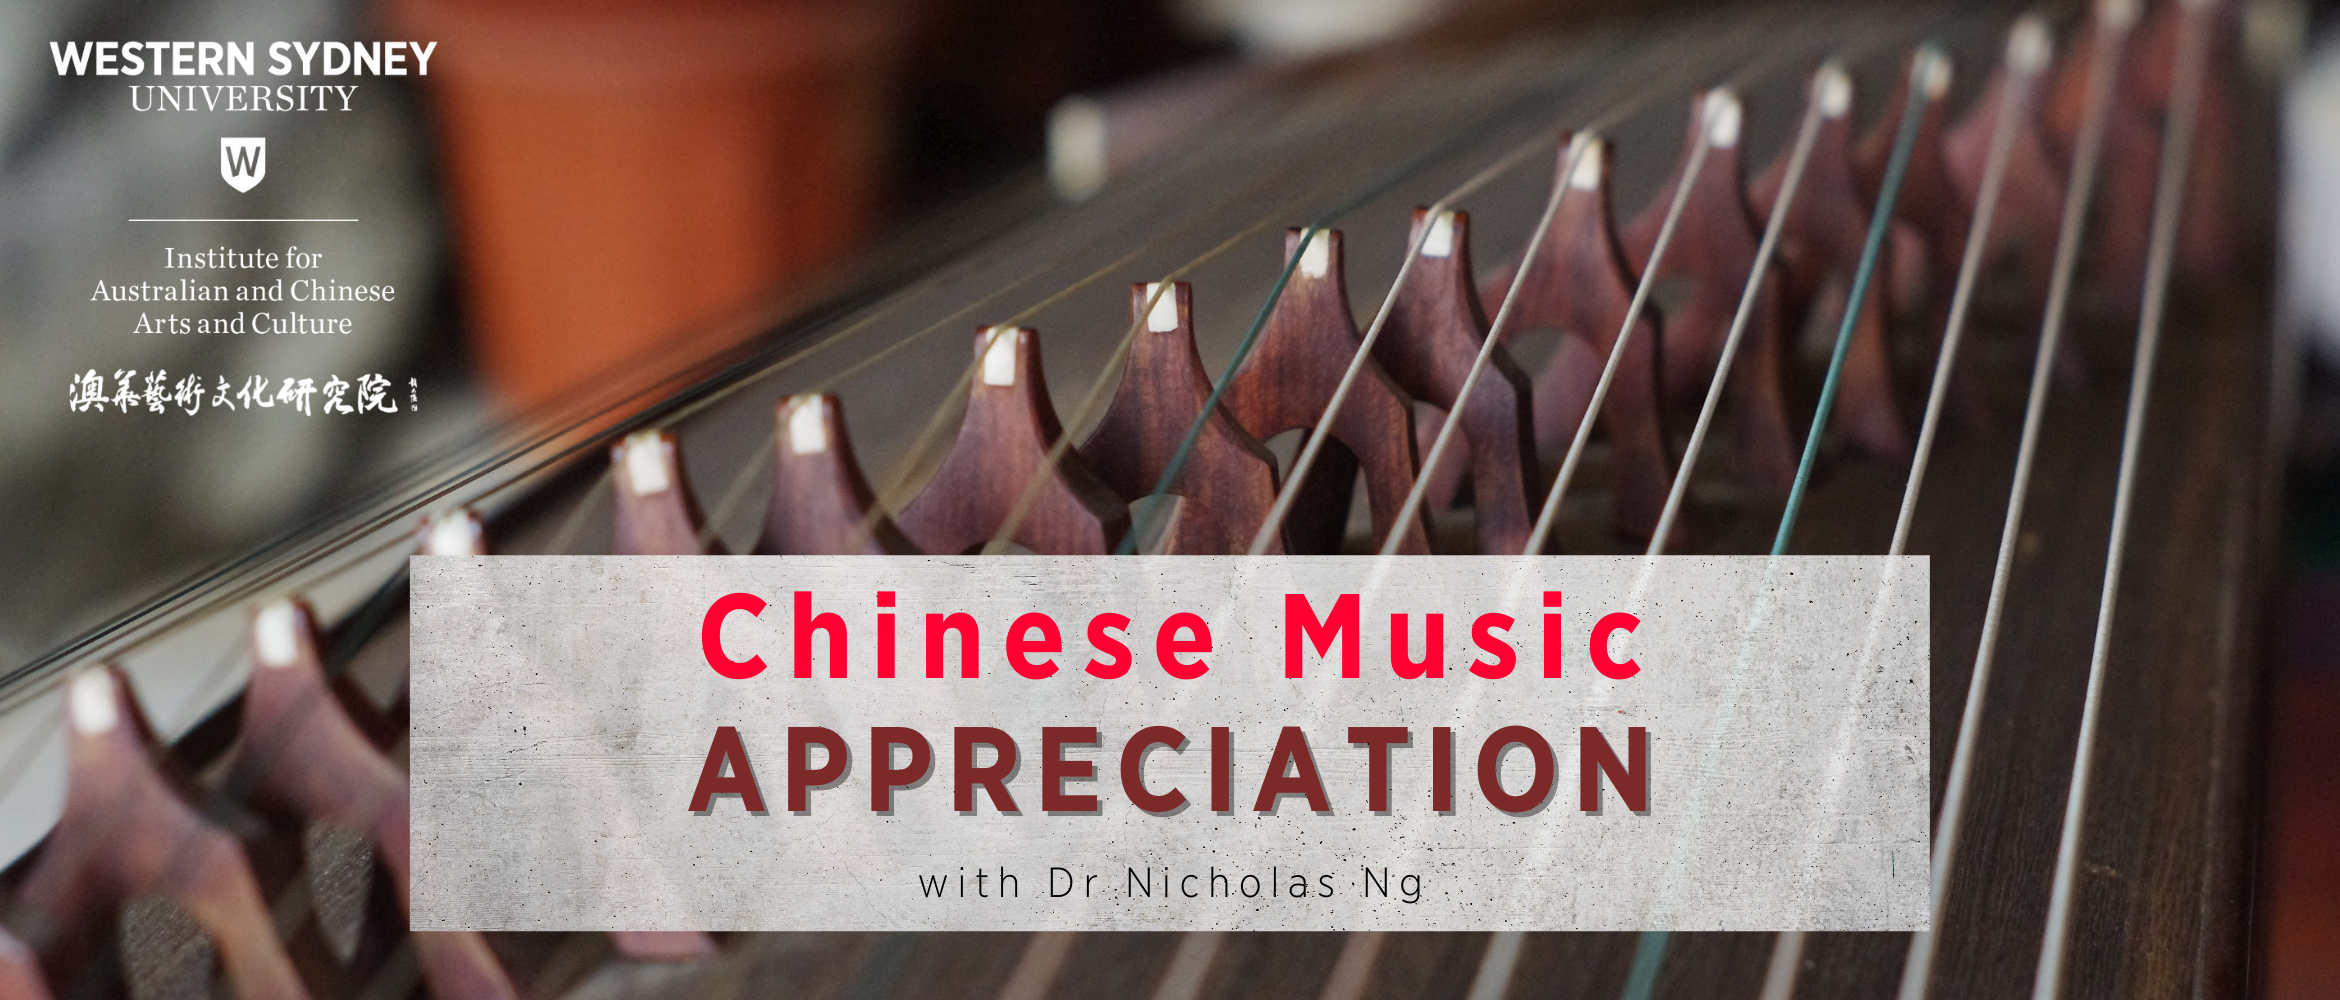 Chinese Music Appreciation IAC EVENT PAGE (1170 × 500px)